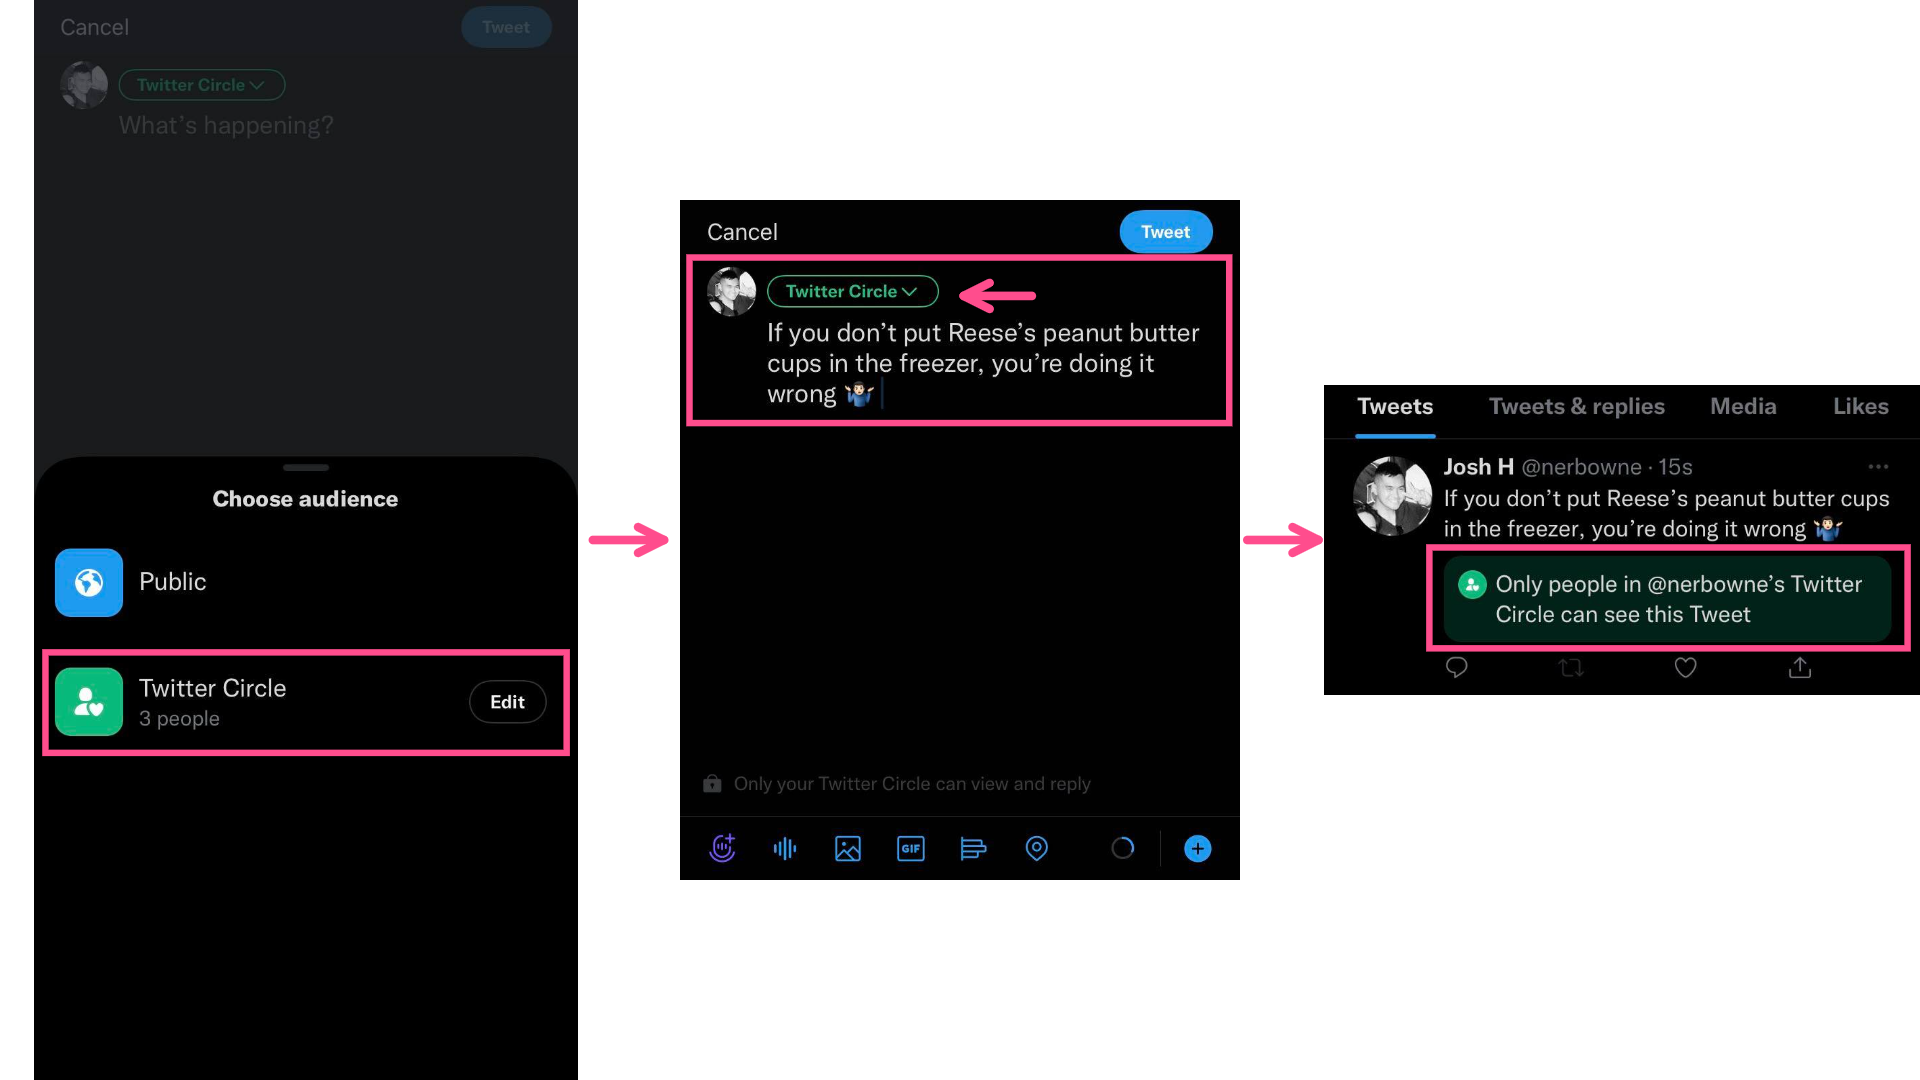 Screenshots showing how to Tweet using the Twitter Circle feature